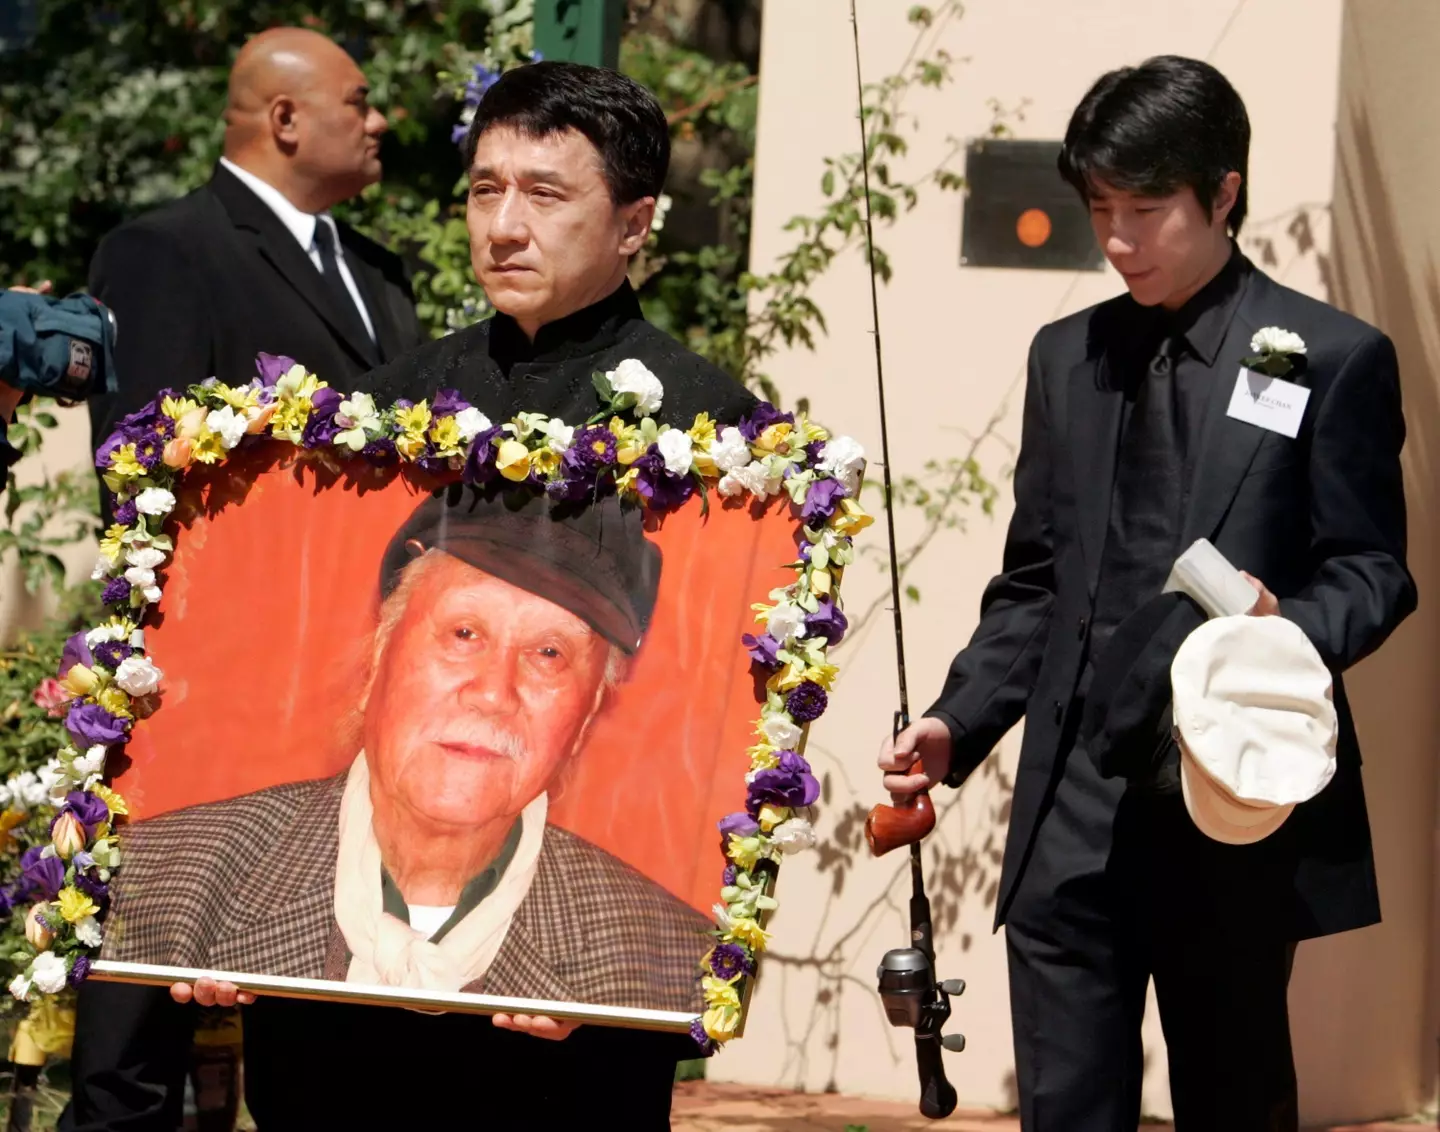 Chan carrying a portrait of his late father.